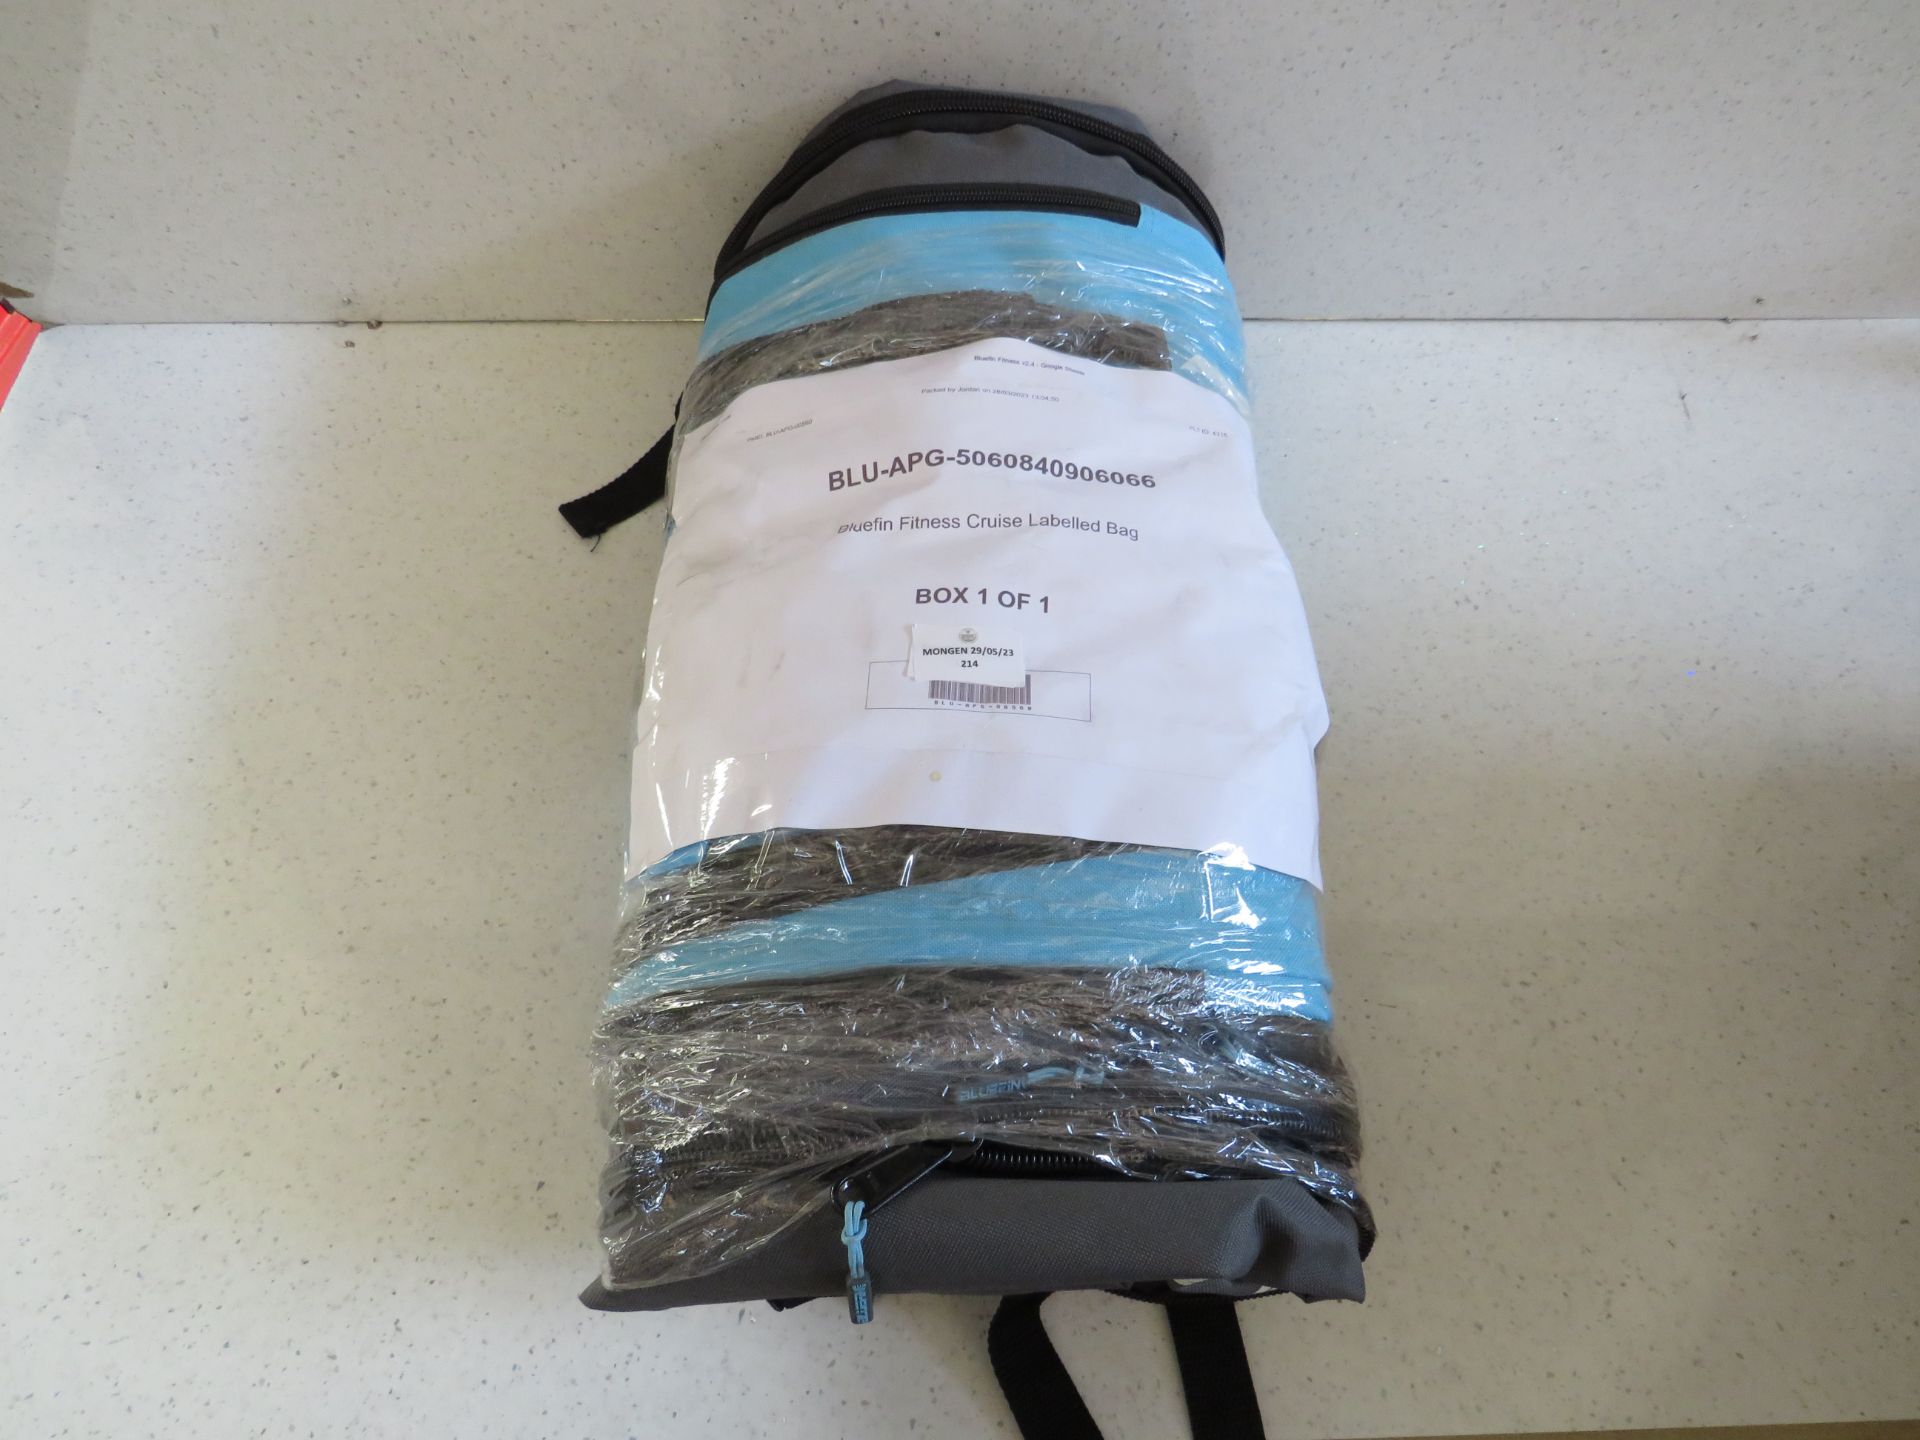 "Bluefin Fitness Cruise Labelled Bag RRP 35.00 PORTABLE & TRAVEL SAFE. This backpack ensures SUPs